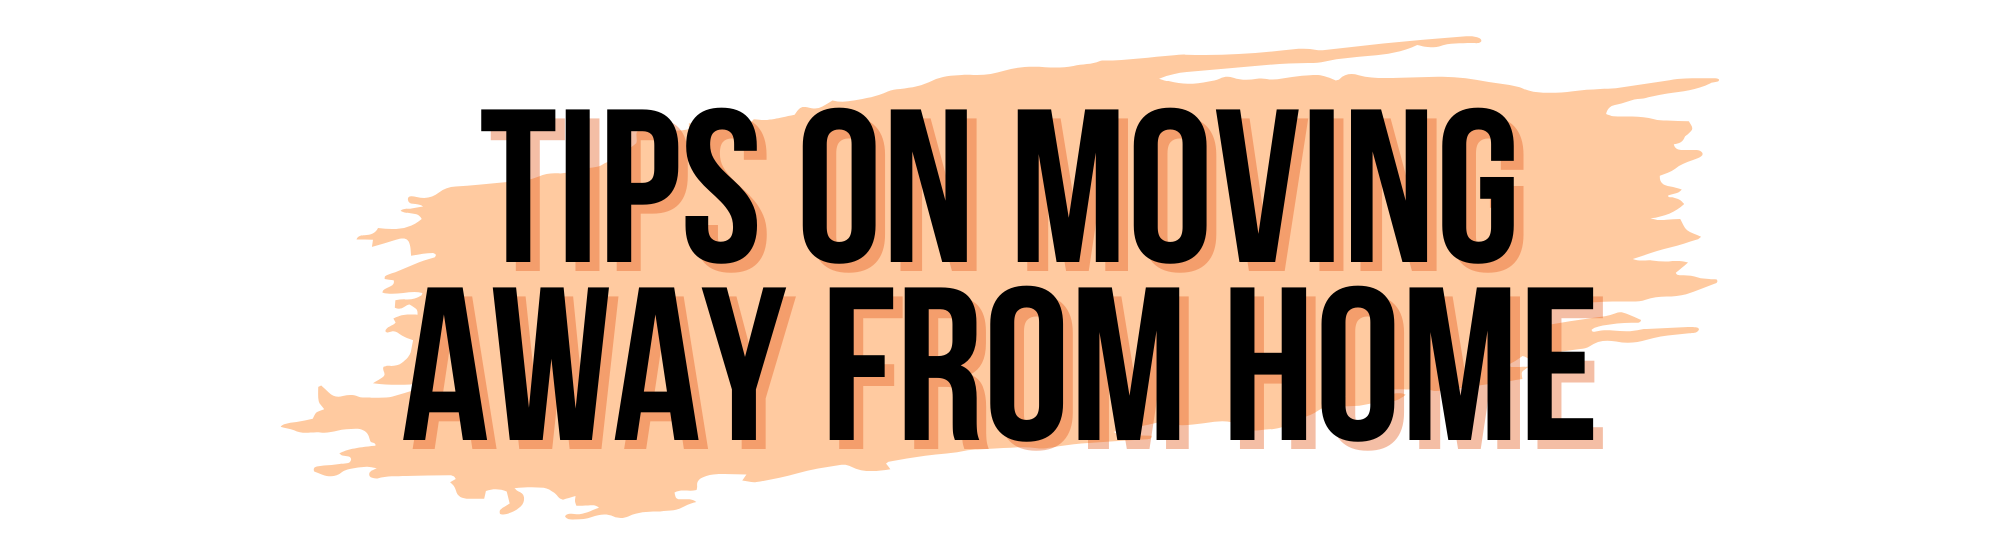 tips on moving away from home